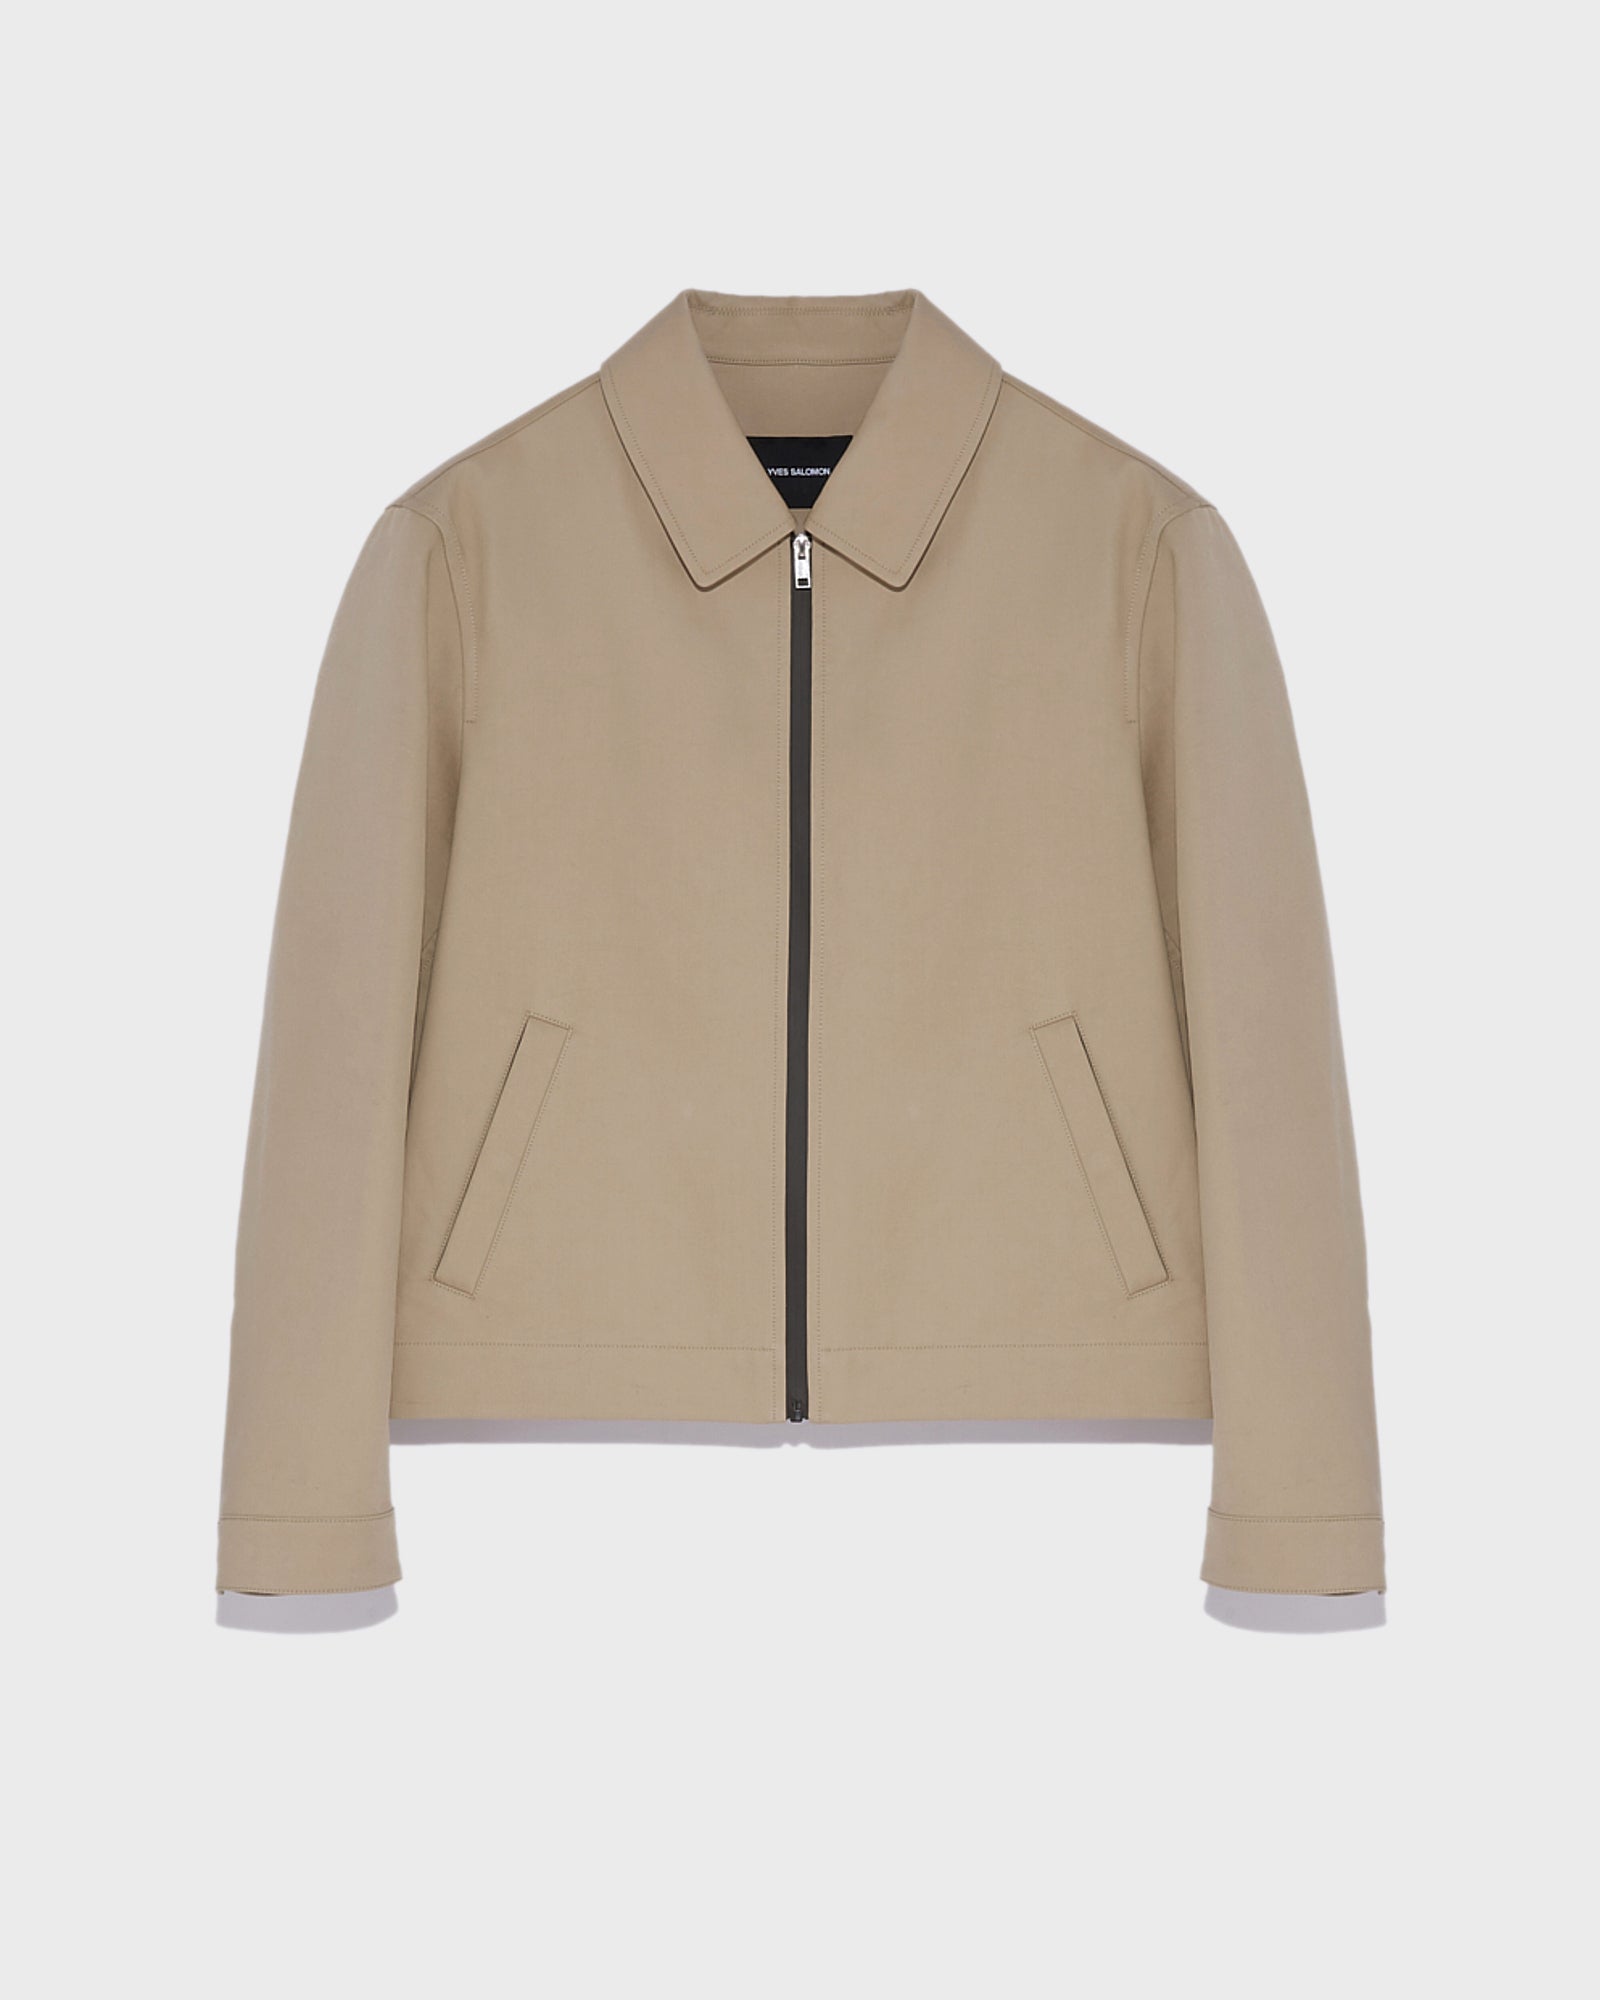 Sale Preview | Men's Coats and Jackets – Yves Salomon US